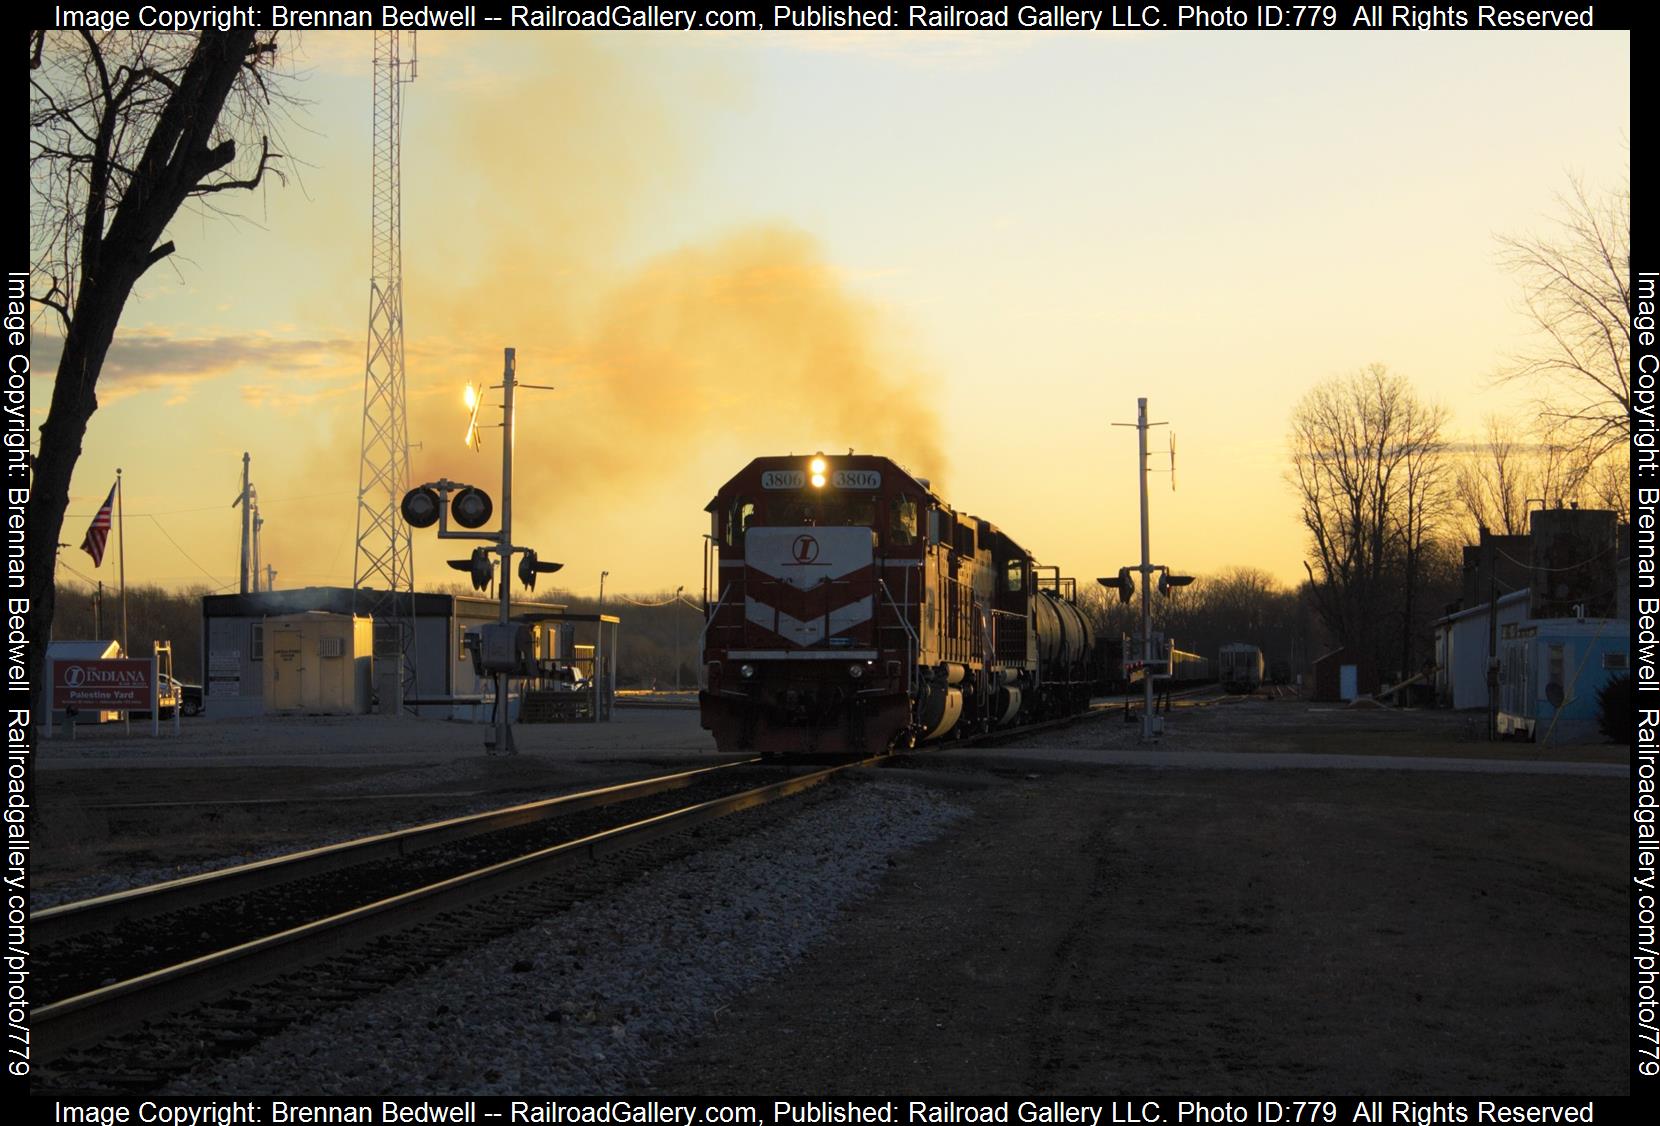 INRD 3806 is a class GP38-2 and  is pictured in Palestine, Illinois, United States.  This was taken along the Indianapolis Subdivision  on the Indiana Rail Road. Photo Copyright: Brennan Bedwell uploaded to Railroad Gallery on 02/28/2023. This photograph of INRD 3806 was taken on Sunday, February 19, 2023. All Rights Reserved. 